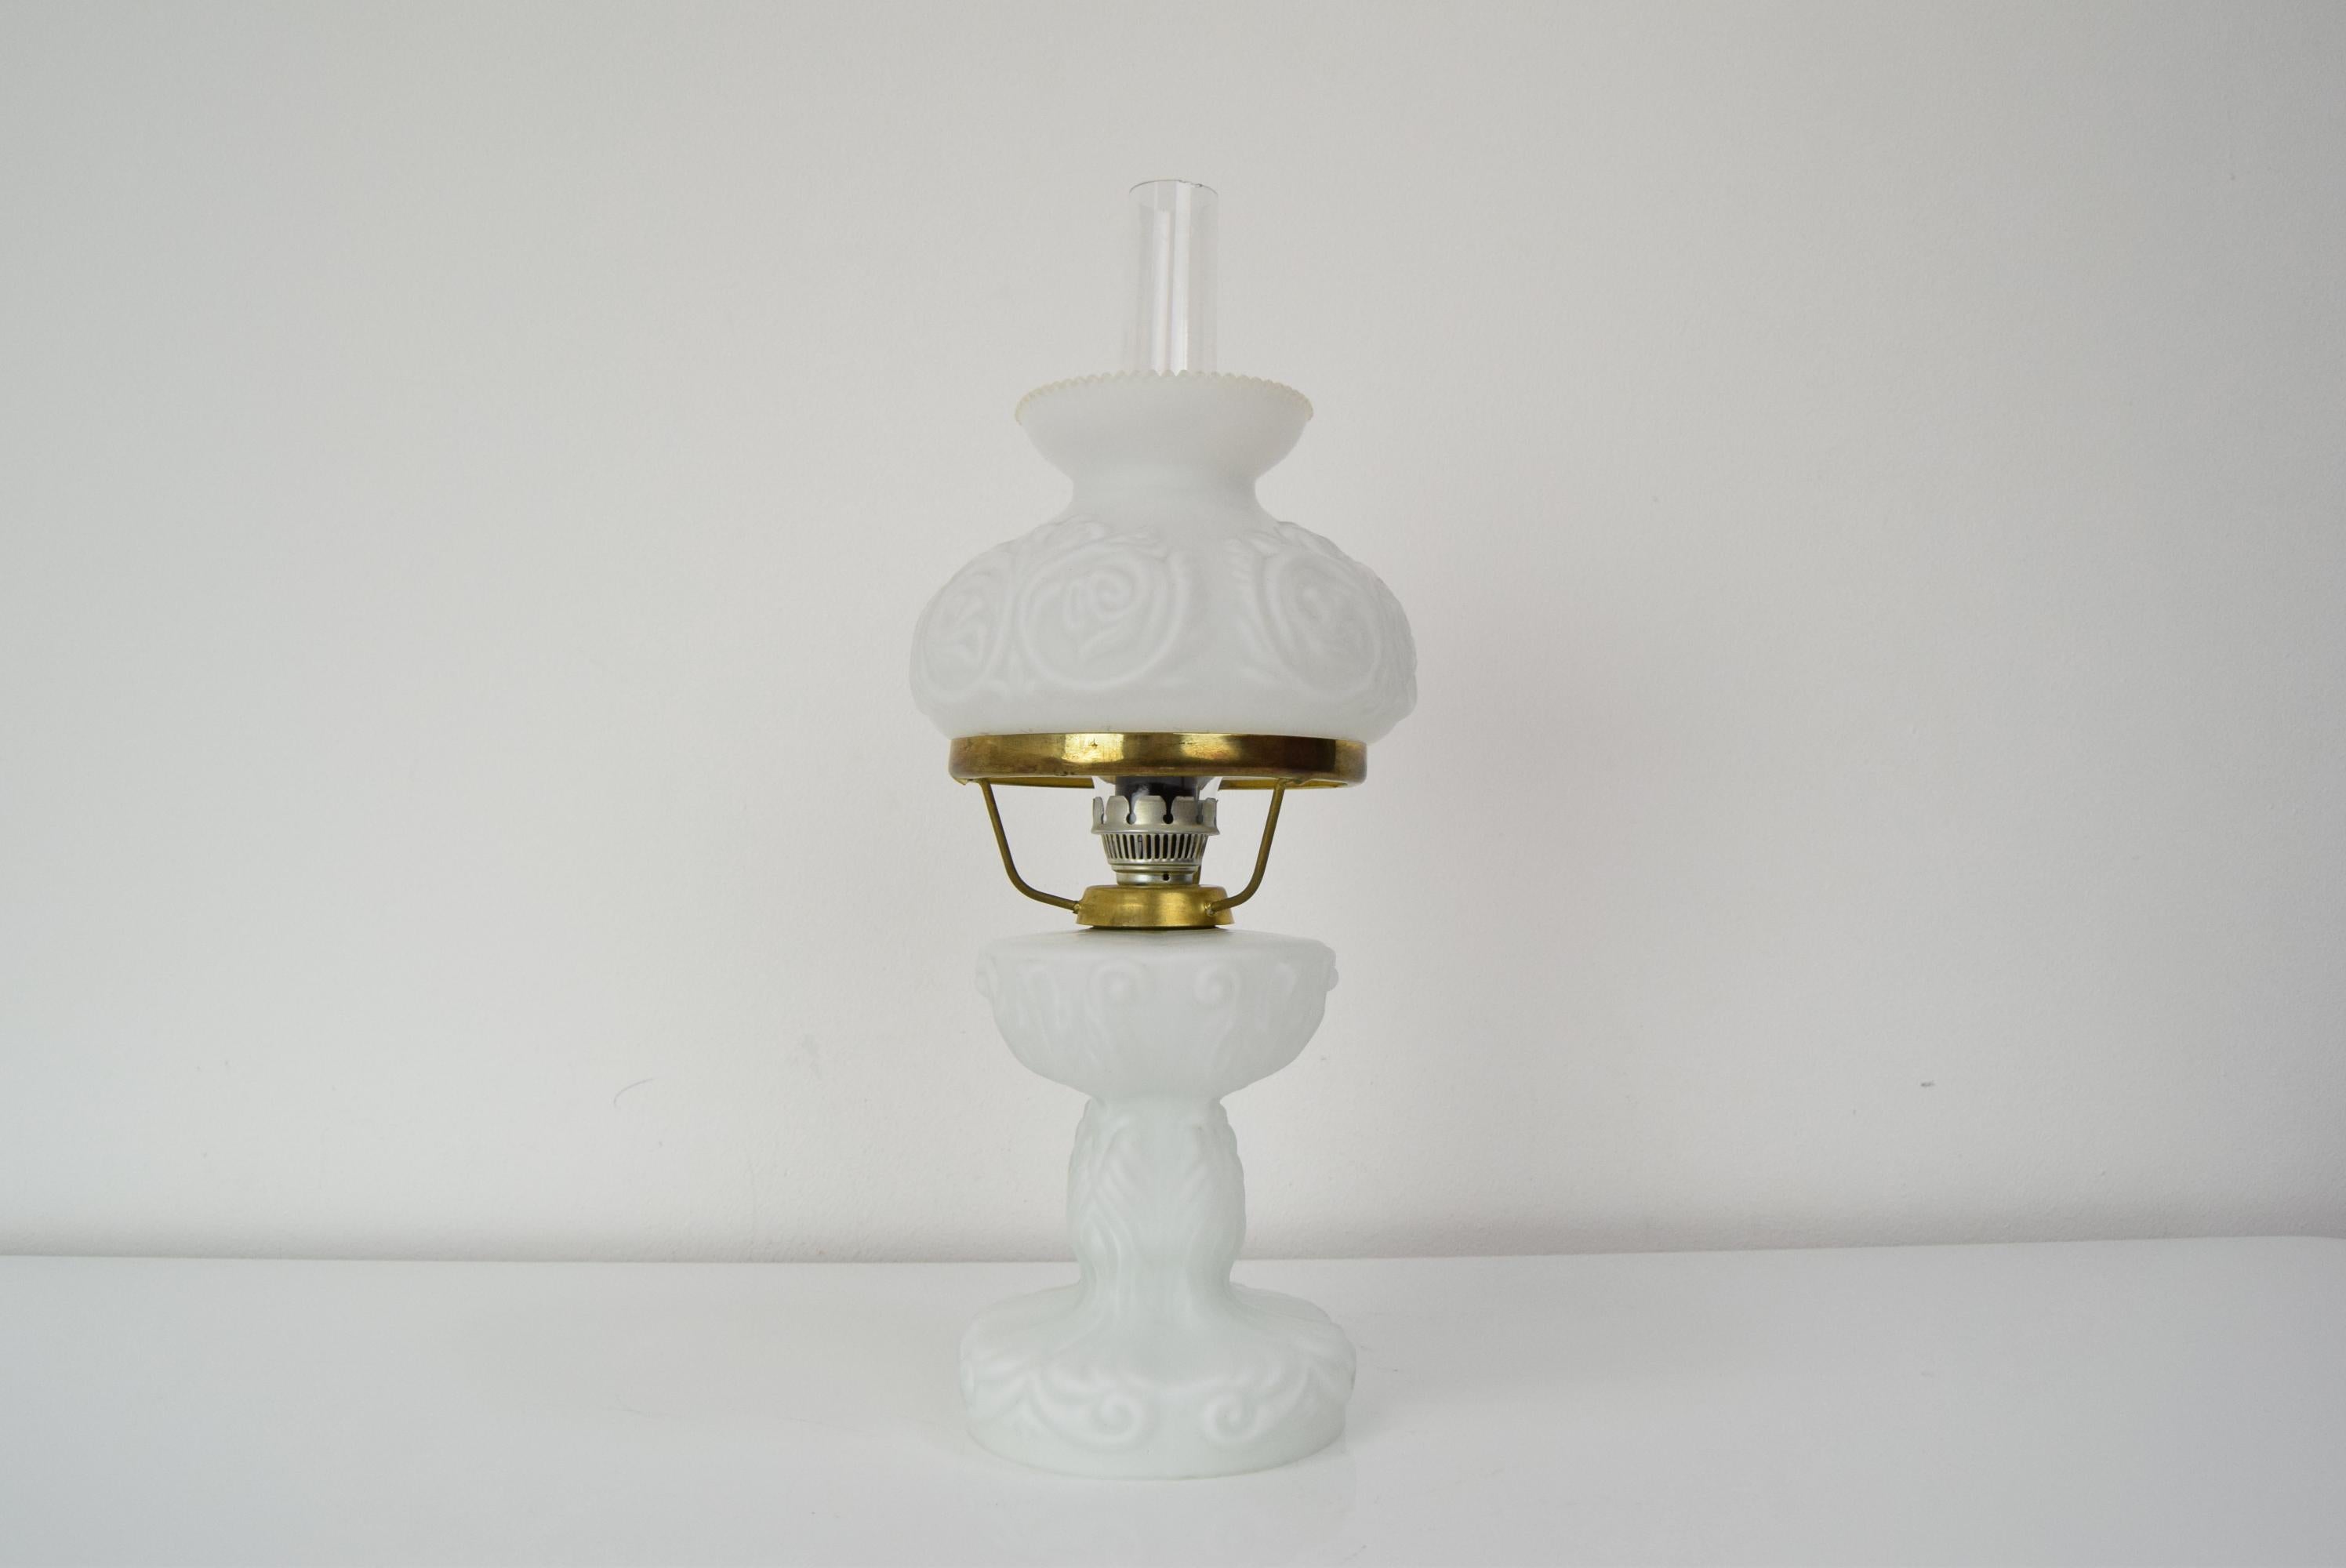 Made in Czechoslovakia
Made of glass, brass
1xE14 or E15 bulb
Re-polished
Original condition
US adapter included.